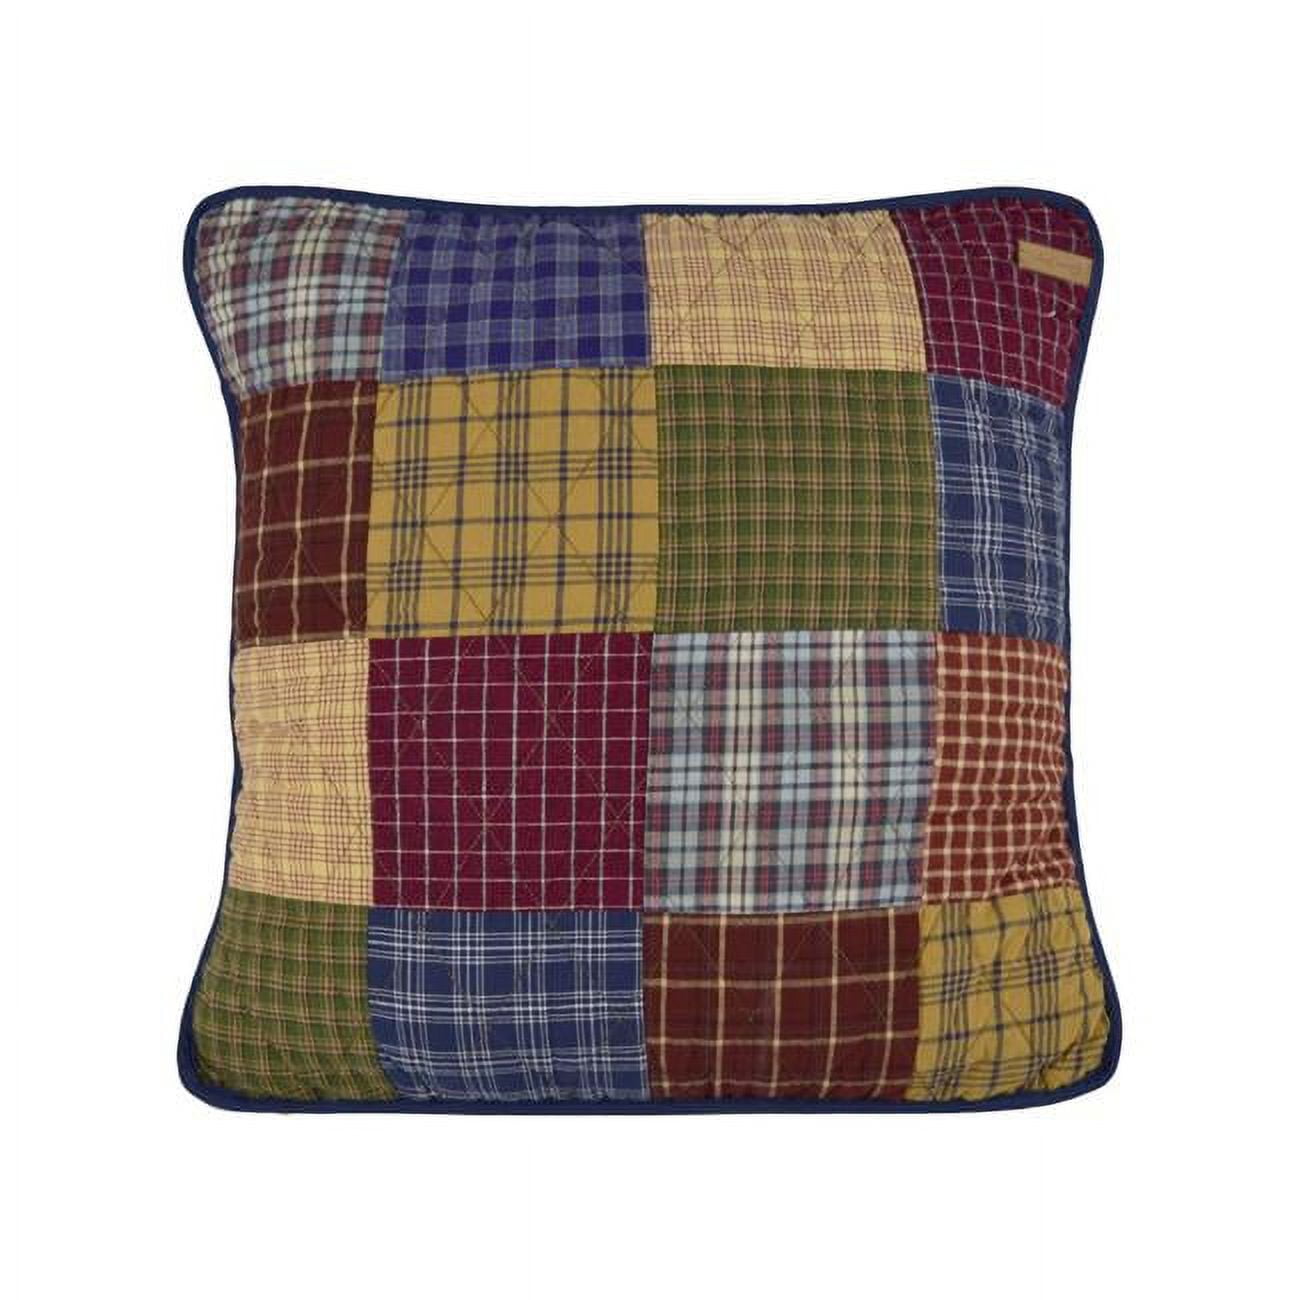 83701 18 X 18 In. Lake House Decorative Pillow, Multi Color